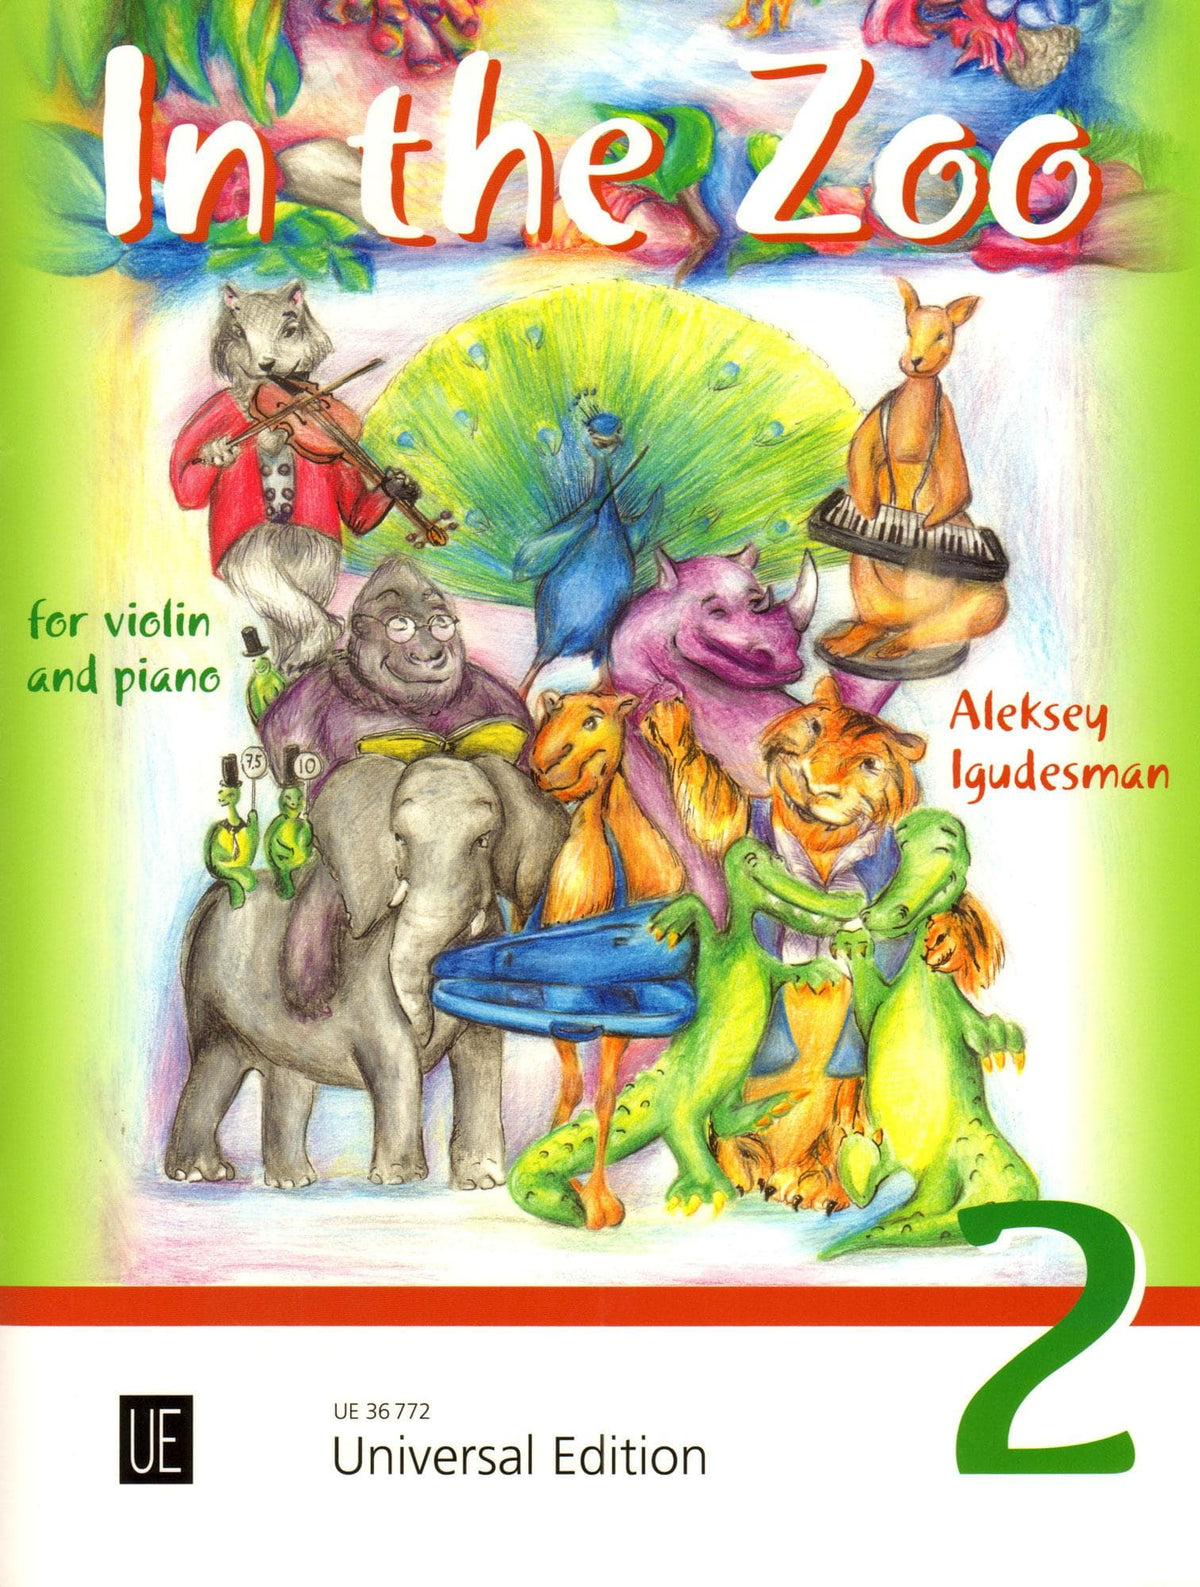 Iguoesman, Aleksey - In the Zoo, Volume 2 - for Violin and Piano - Universal Edition